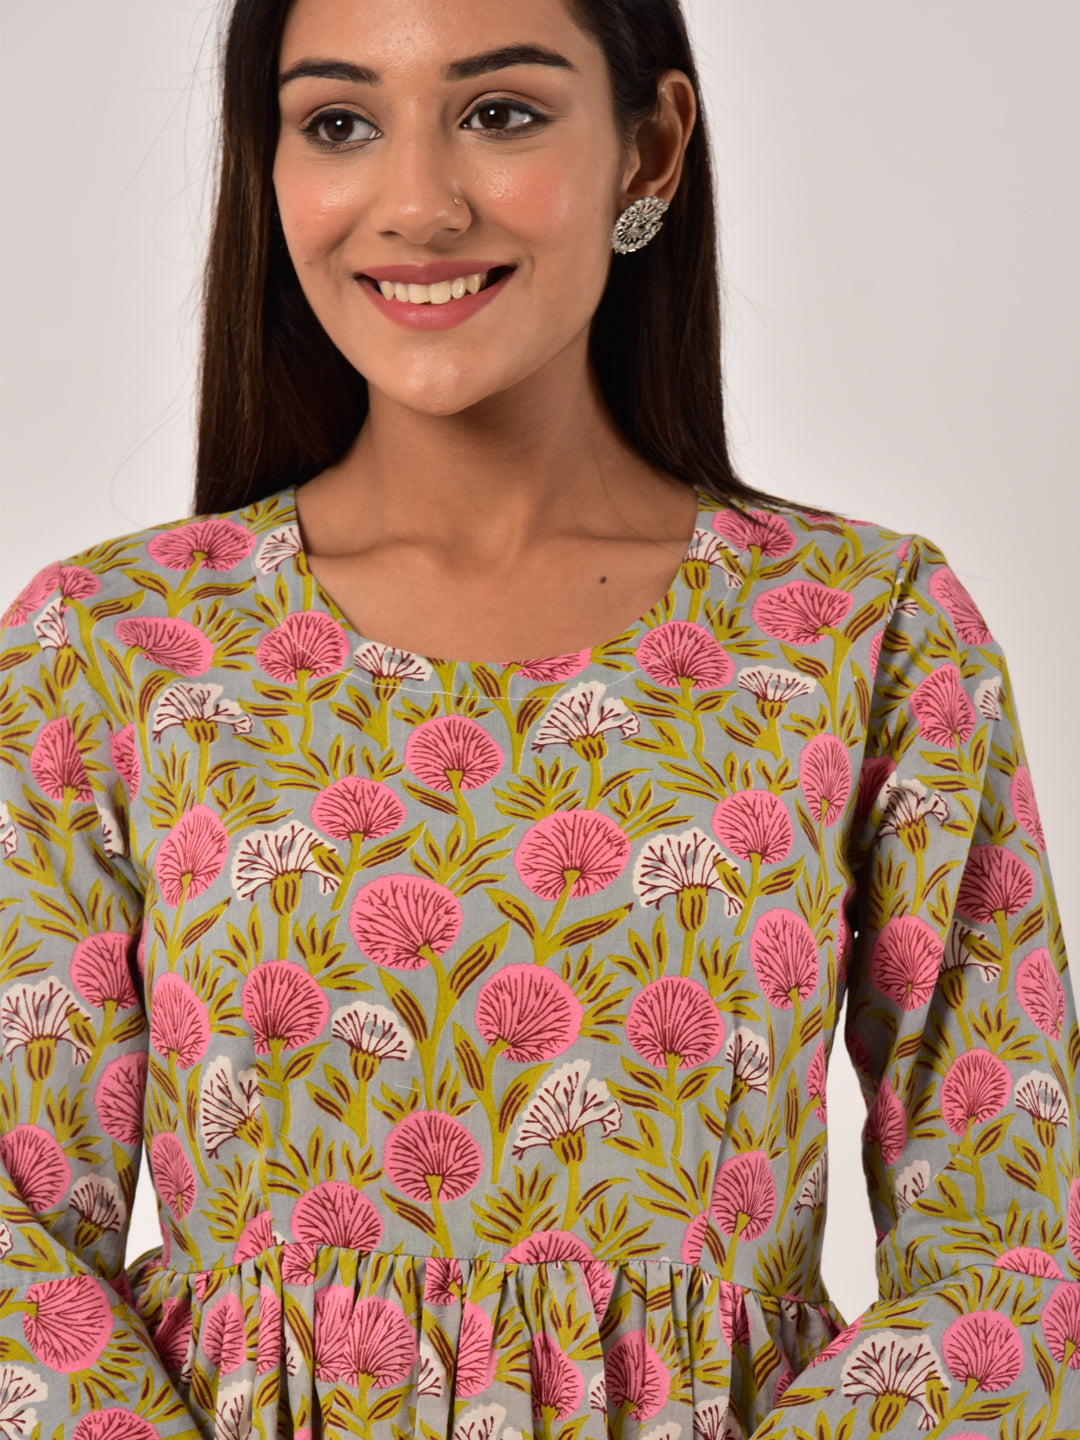 Cotton Floral Jaal Gather Top in Pink